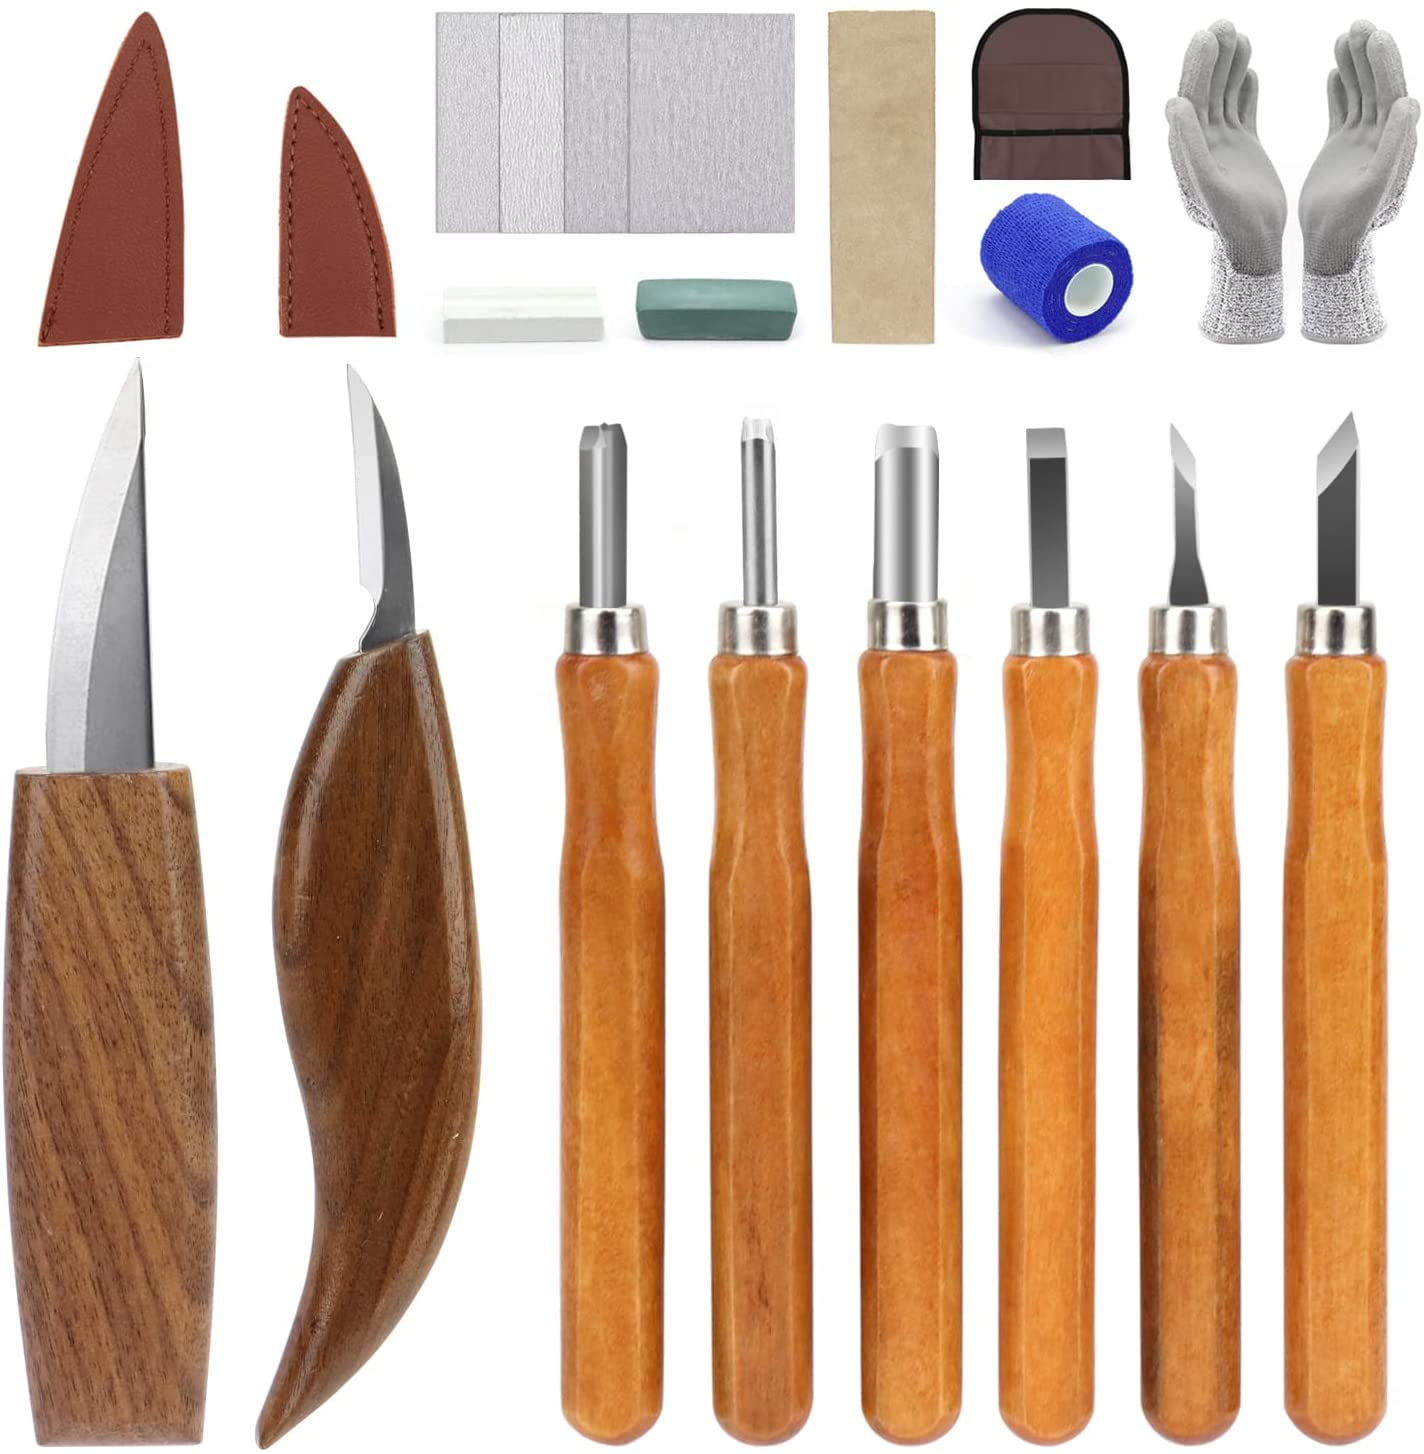 Wood Carving Tools, 13 in 1 Wood Carving Kit with Carving Hook Knife, Wood  Whittling Knife, Chip Carving Knife, Gloves, Carving Knife Sharpener for